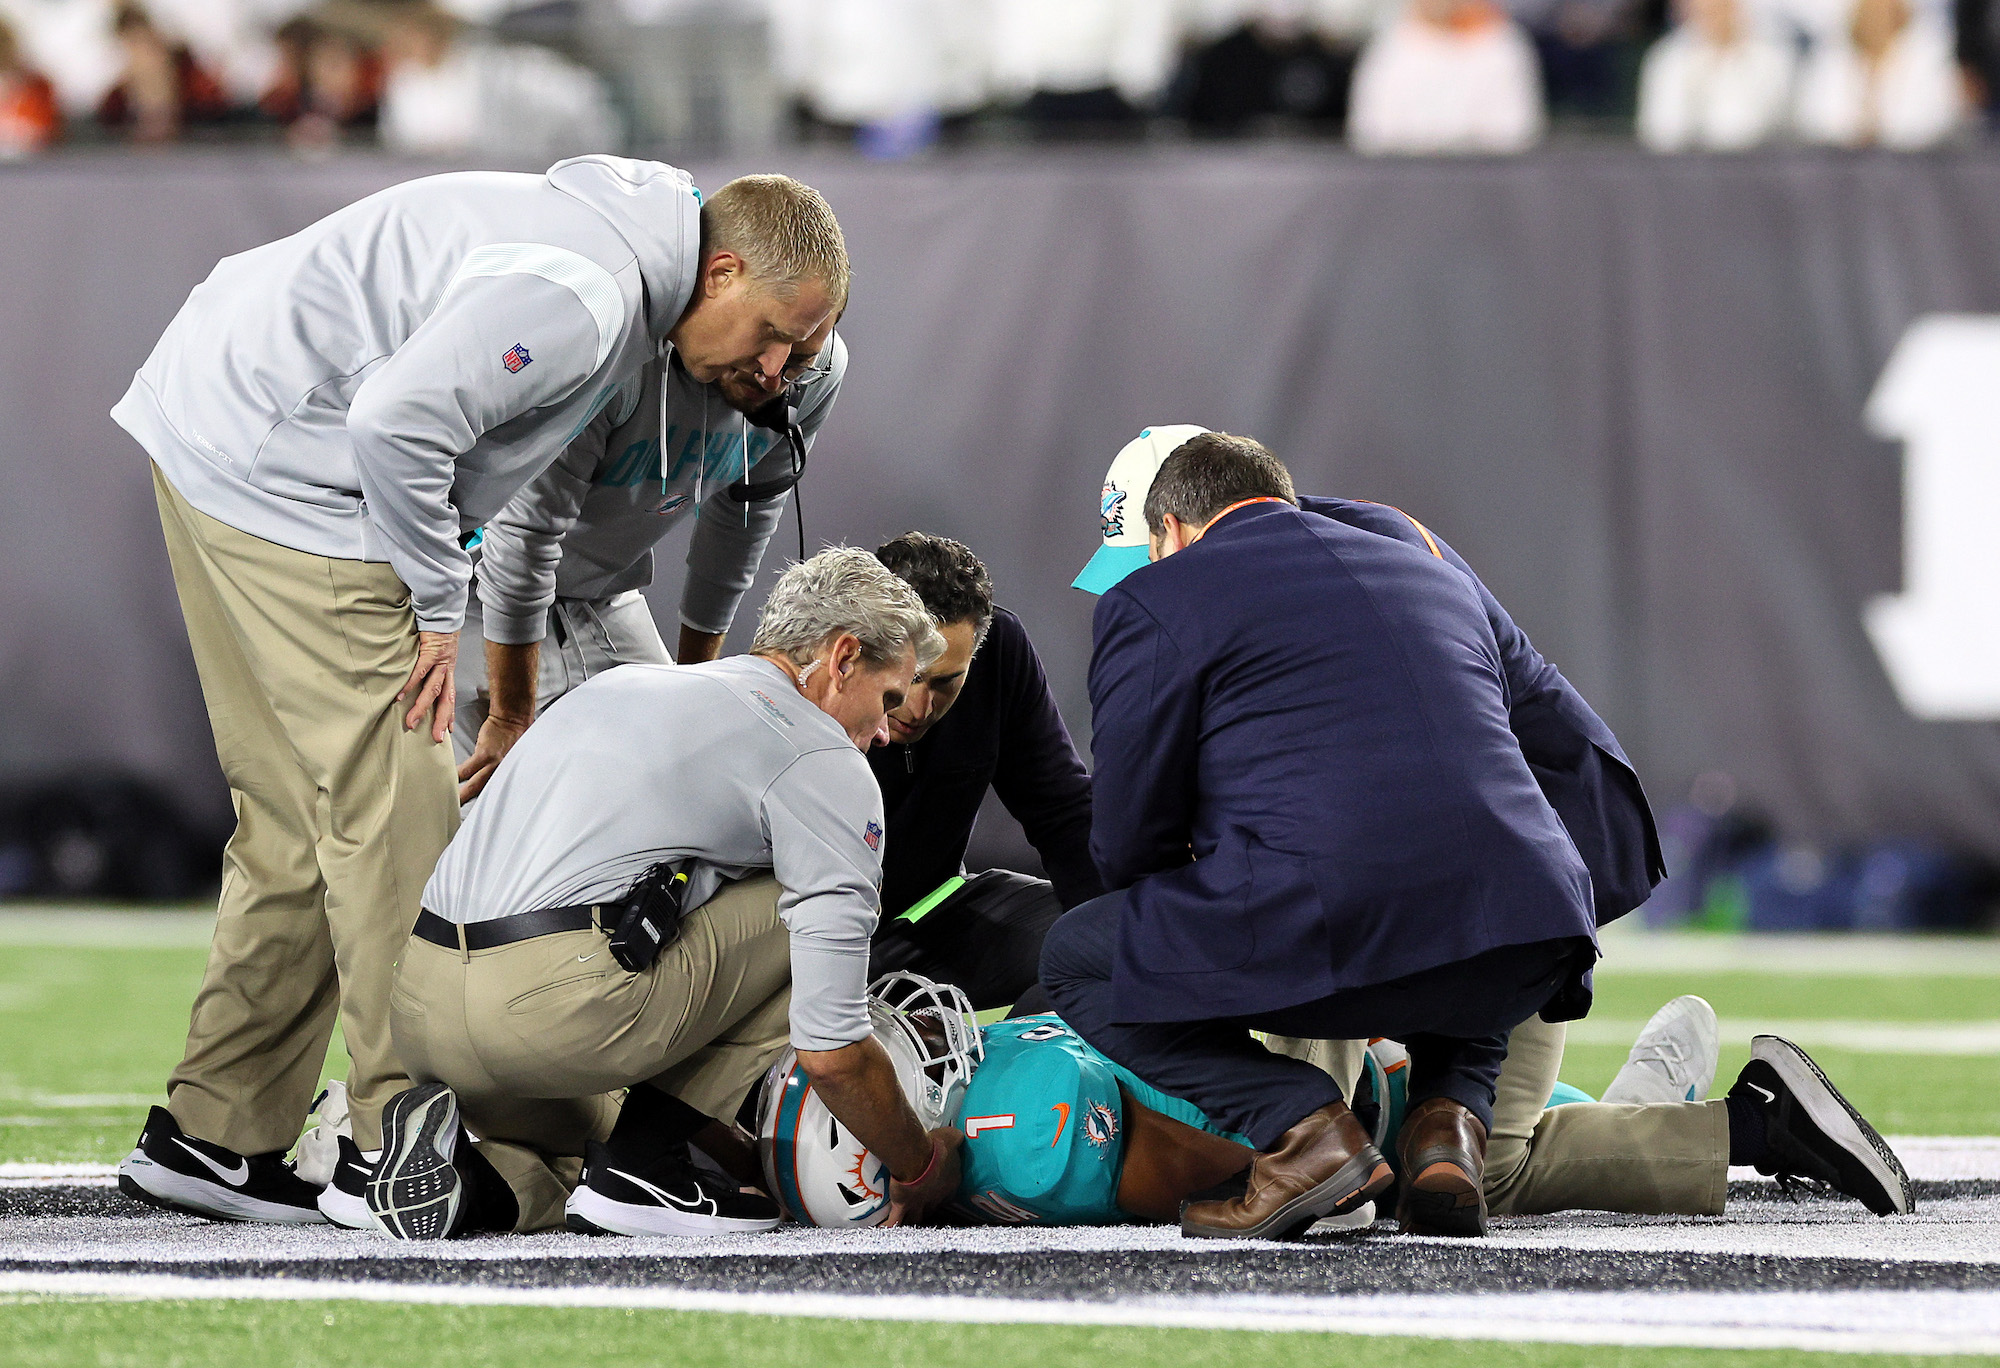 CINCINNATI, OHIO - SEPTEMBER 29: Medical staff tend to quarterback Tua Tagovailoa #1 of the Miami Dolphins after an injury during the 2nd quarter of the game against the Cincinnati Bengals at Paycor Stadium on September 29, 2022 in Cincinnati, Ohio. (Photo by Andy Lyons/Getty Images)